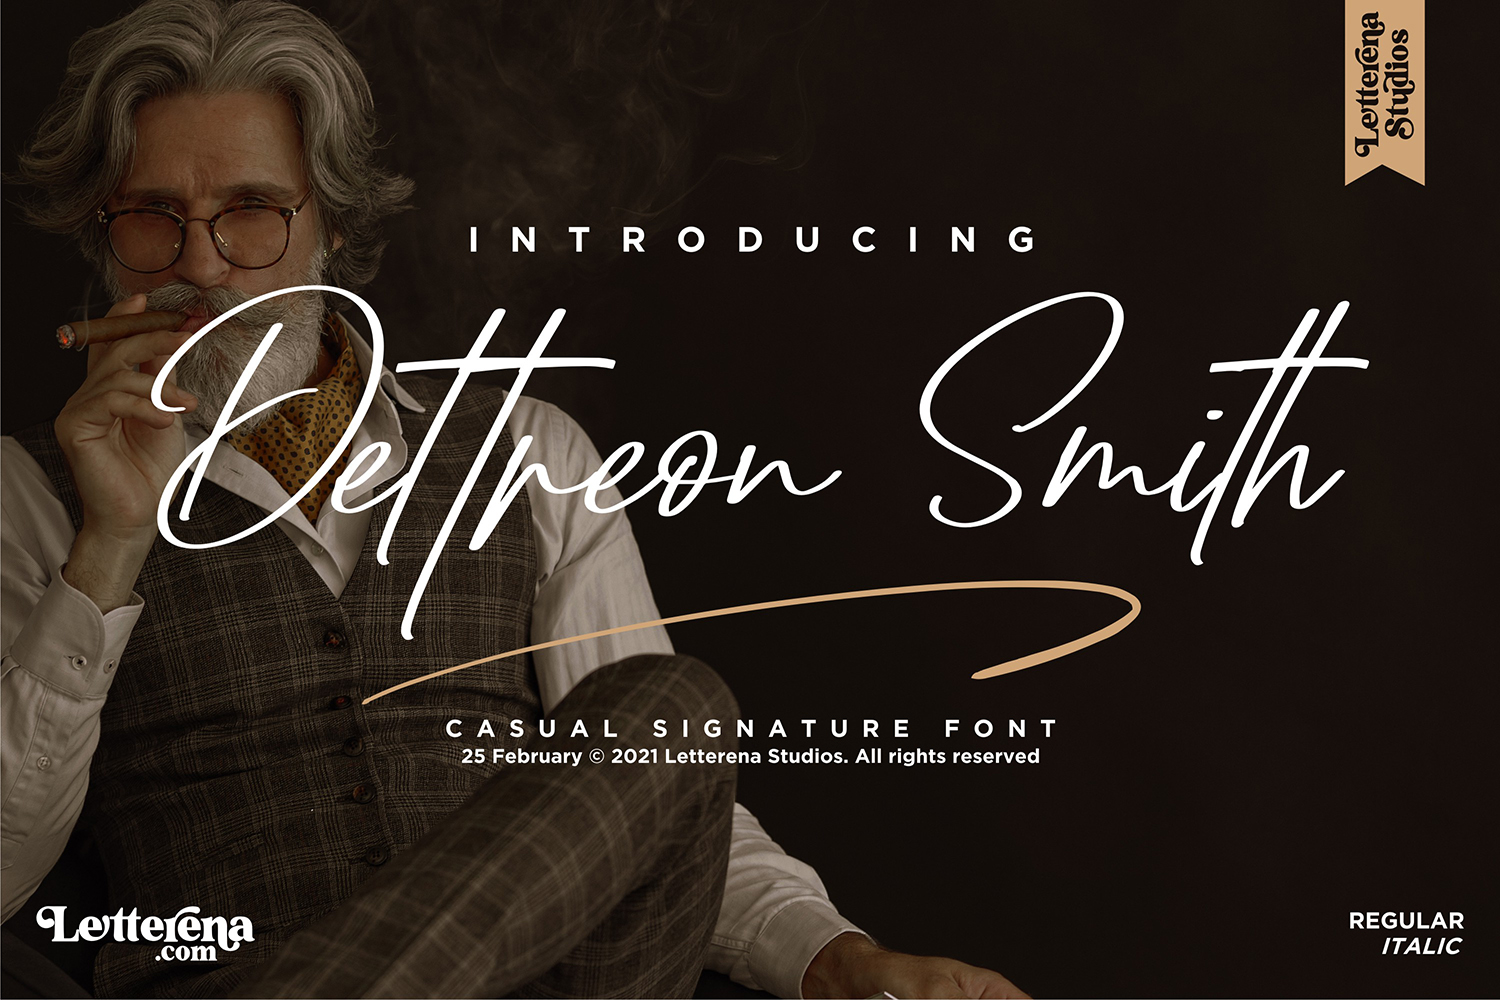 Dettreon Smith Free Font